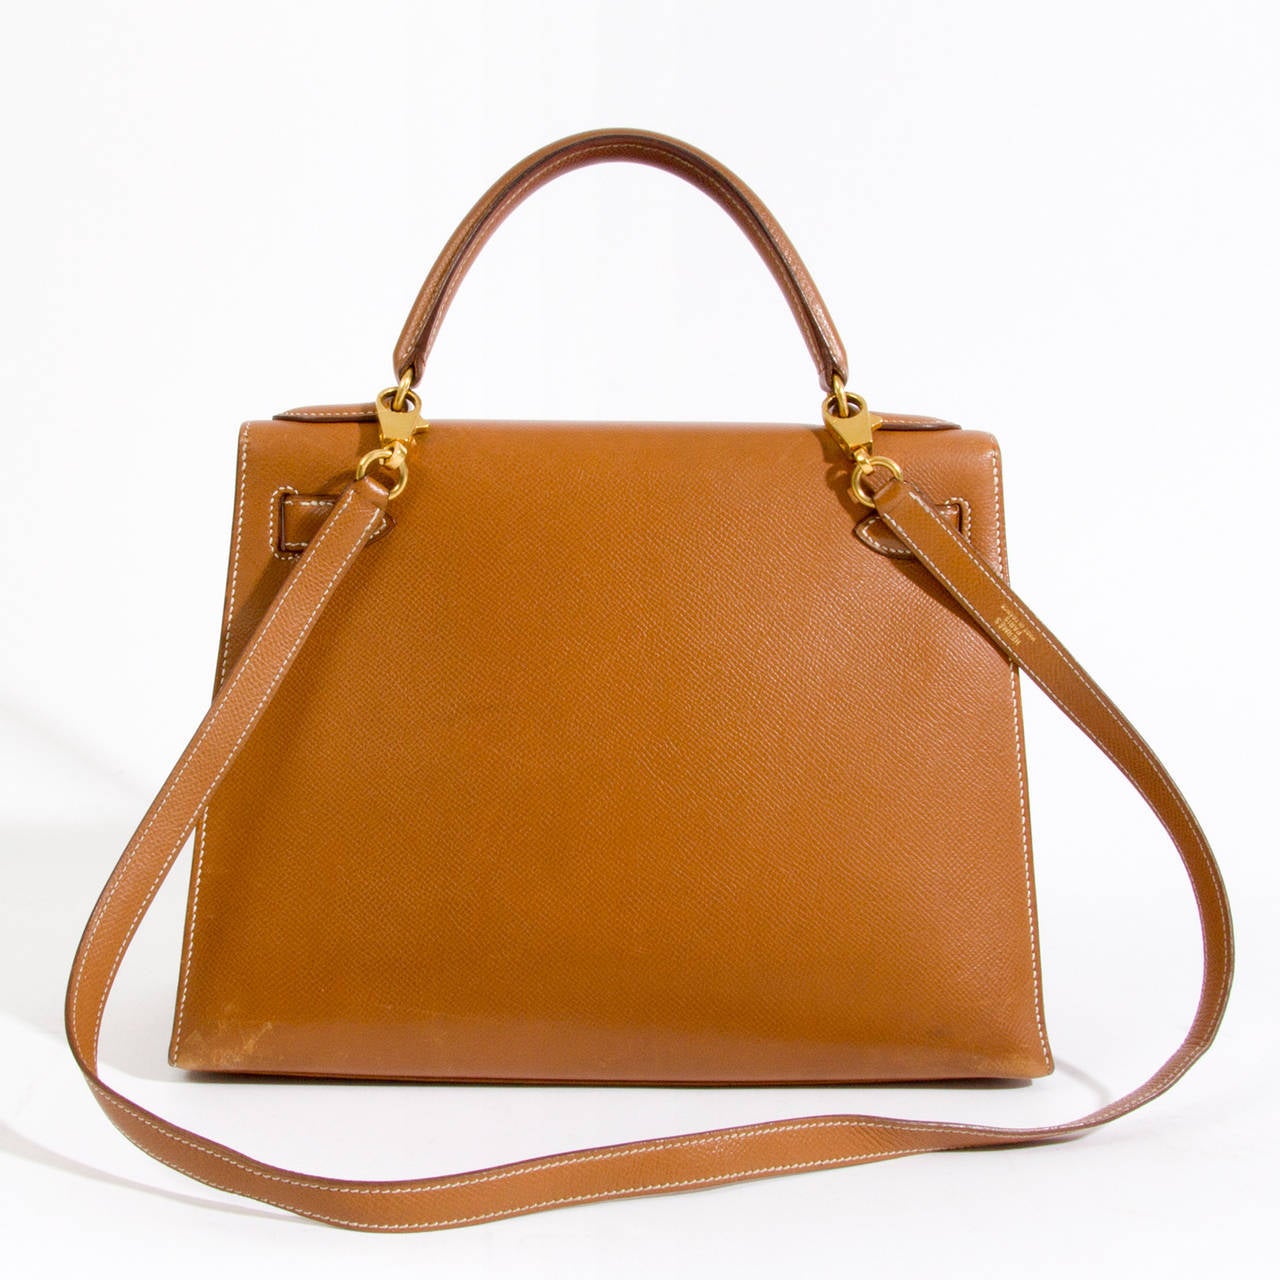 Reach ultimate style and class with this gorgeous vintage Hermès Kelly bag. 
Vintage Hermes Kelly cognac with golden hardware and shoulder strap. 
Comes with strap.
Blindstamp U in a circle.